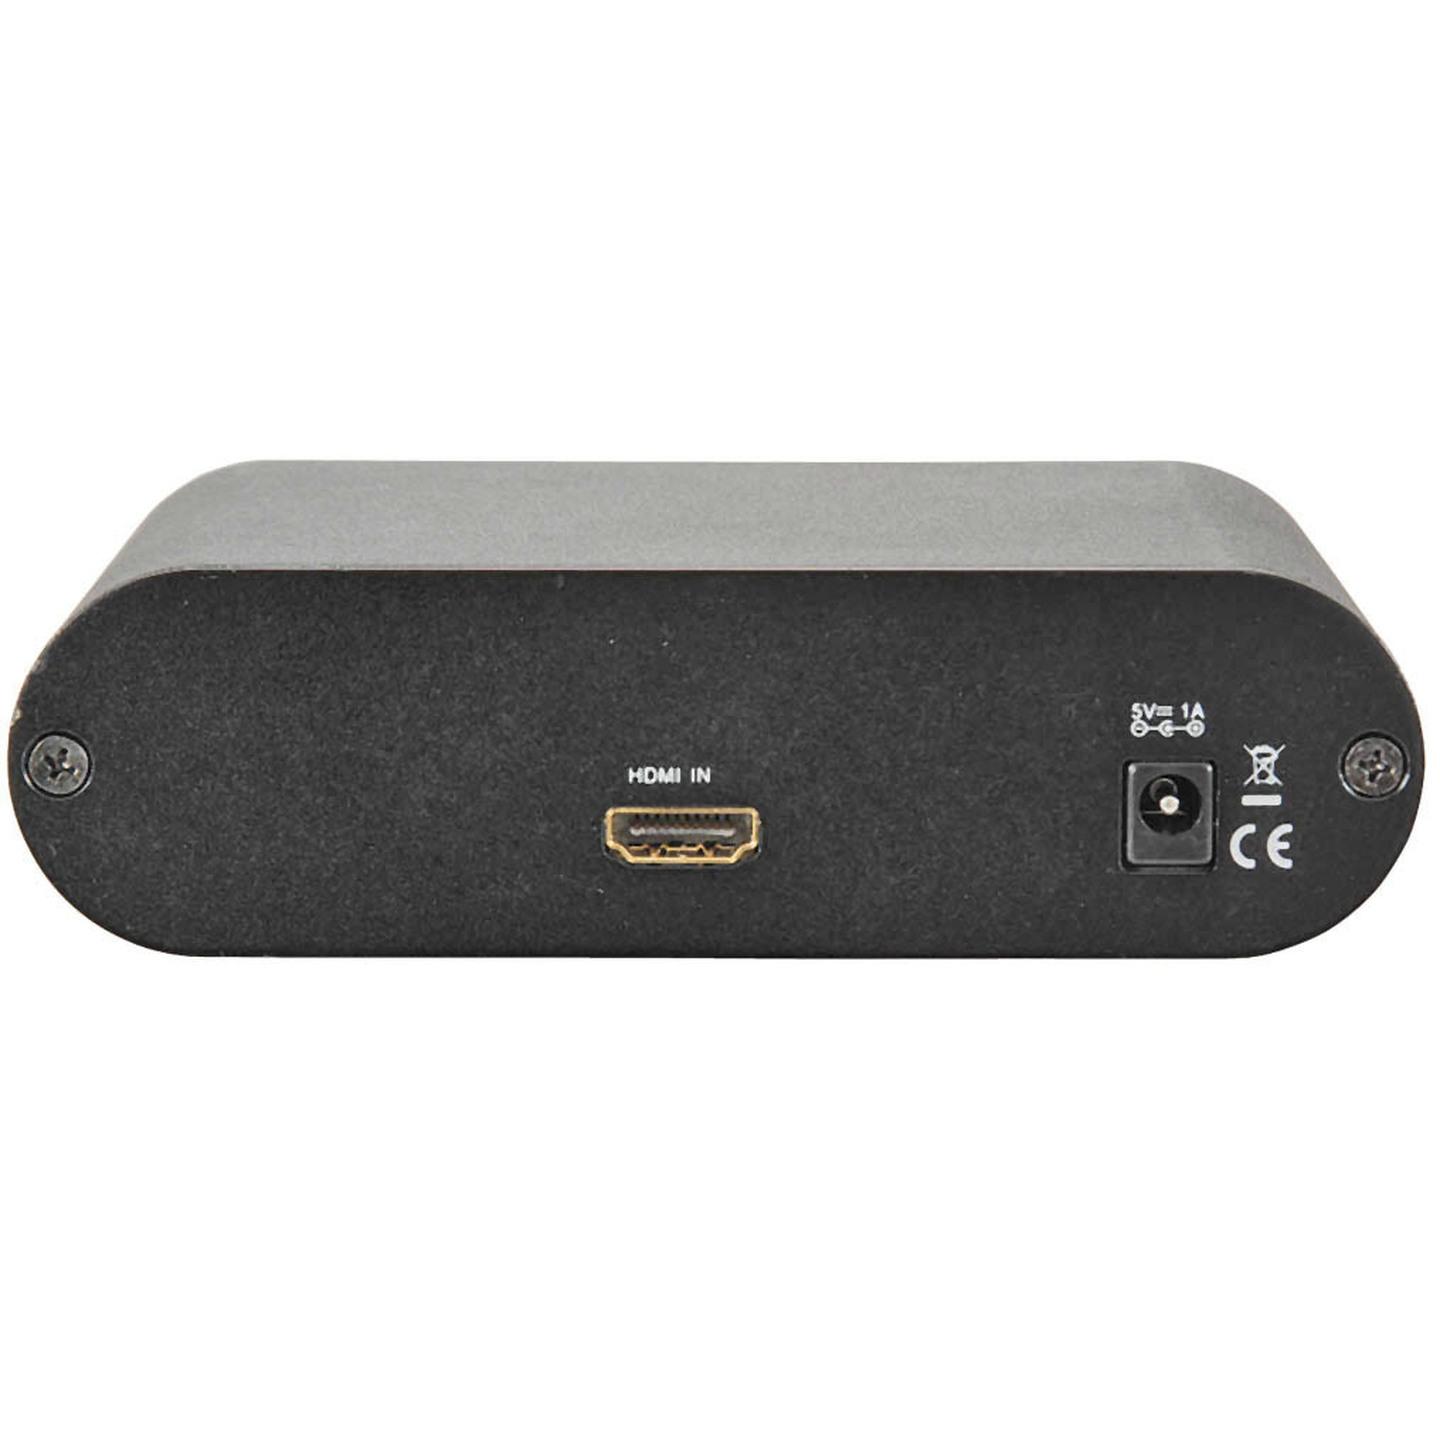 HDMI to VGA/Component and LR Analogue Audio Converter